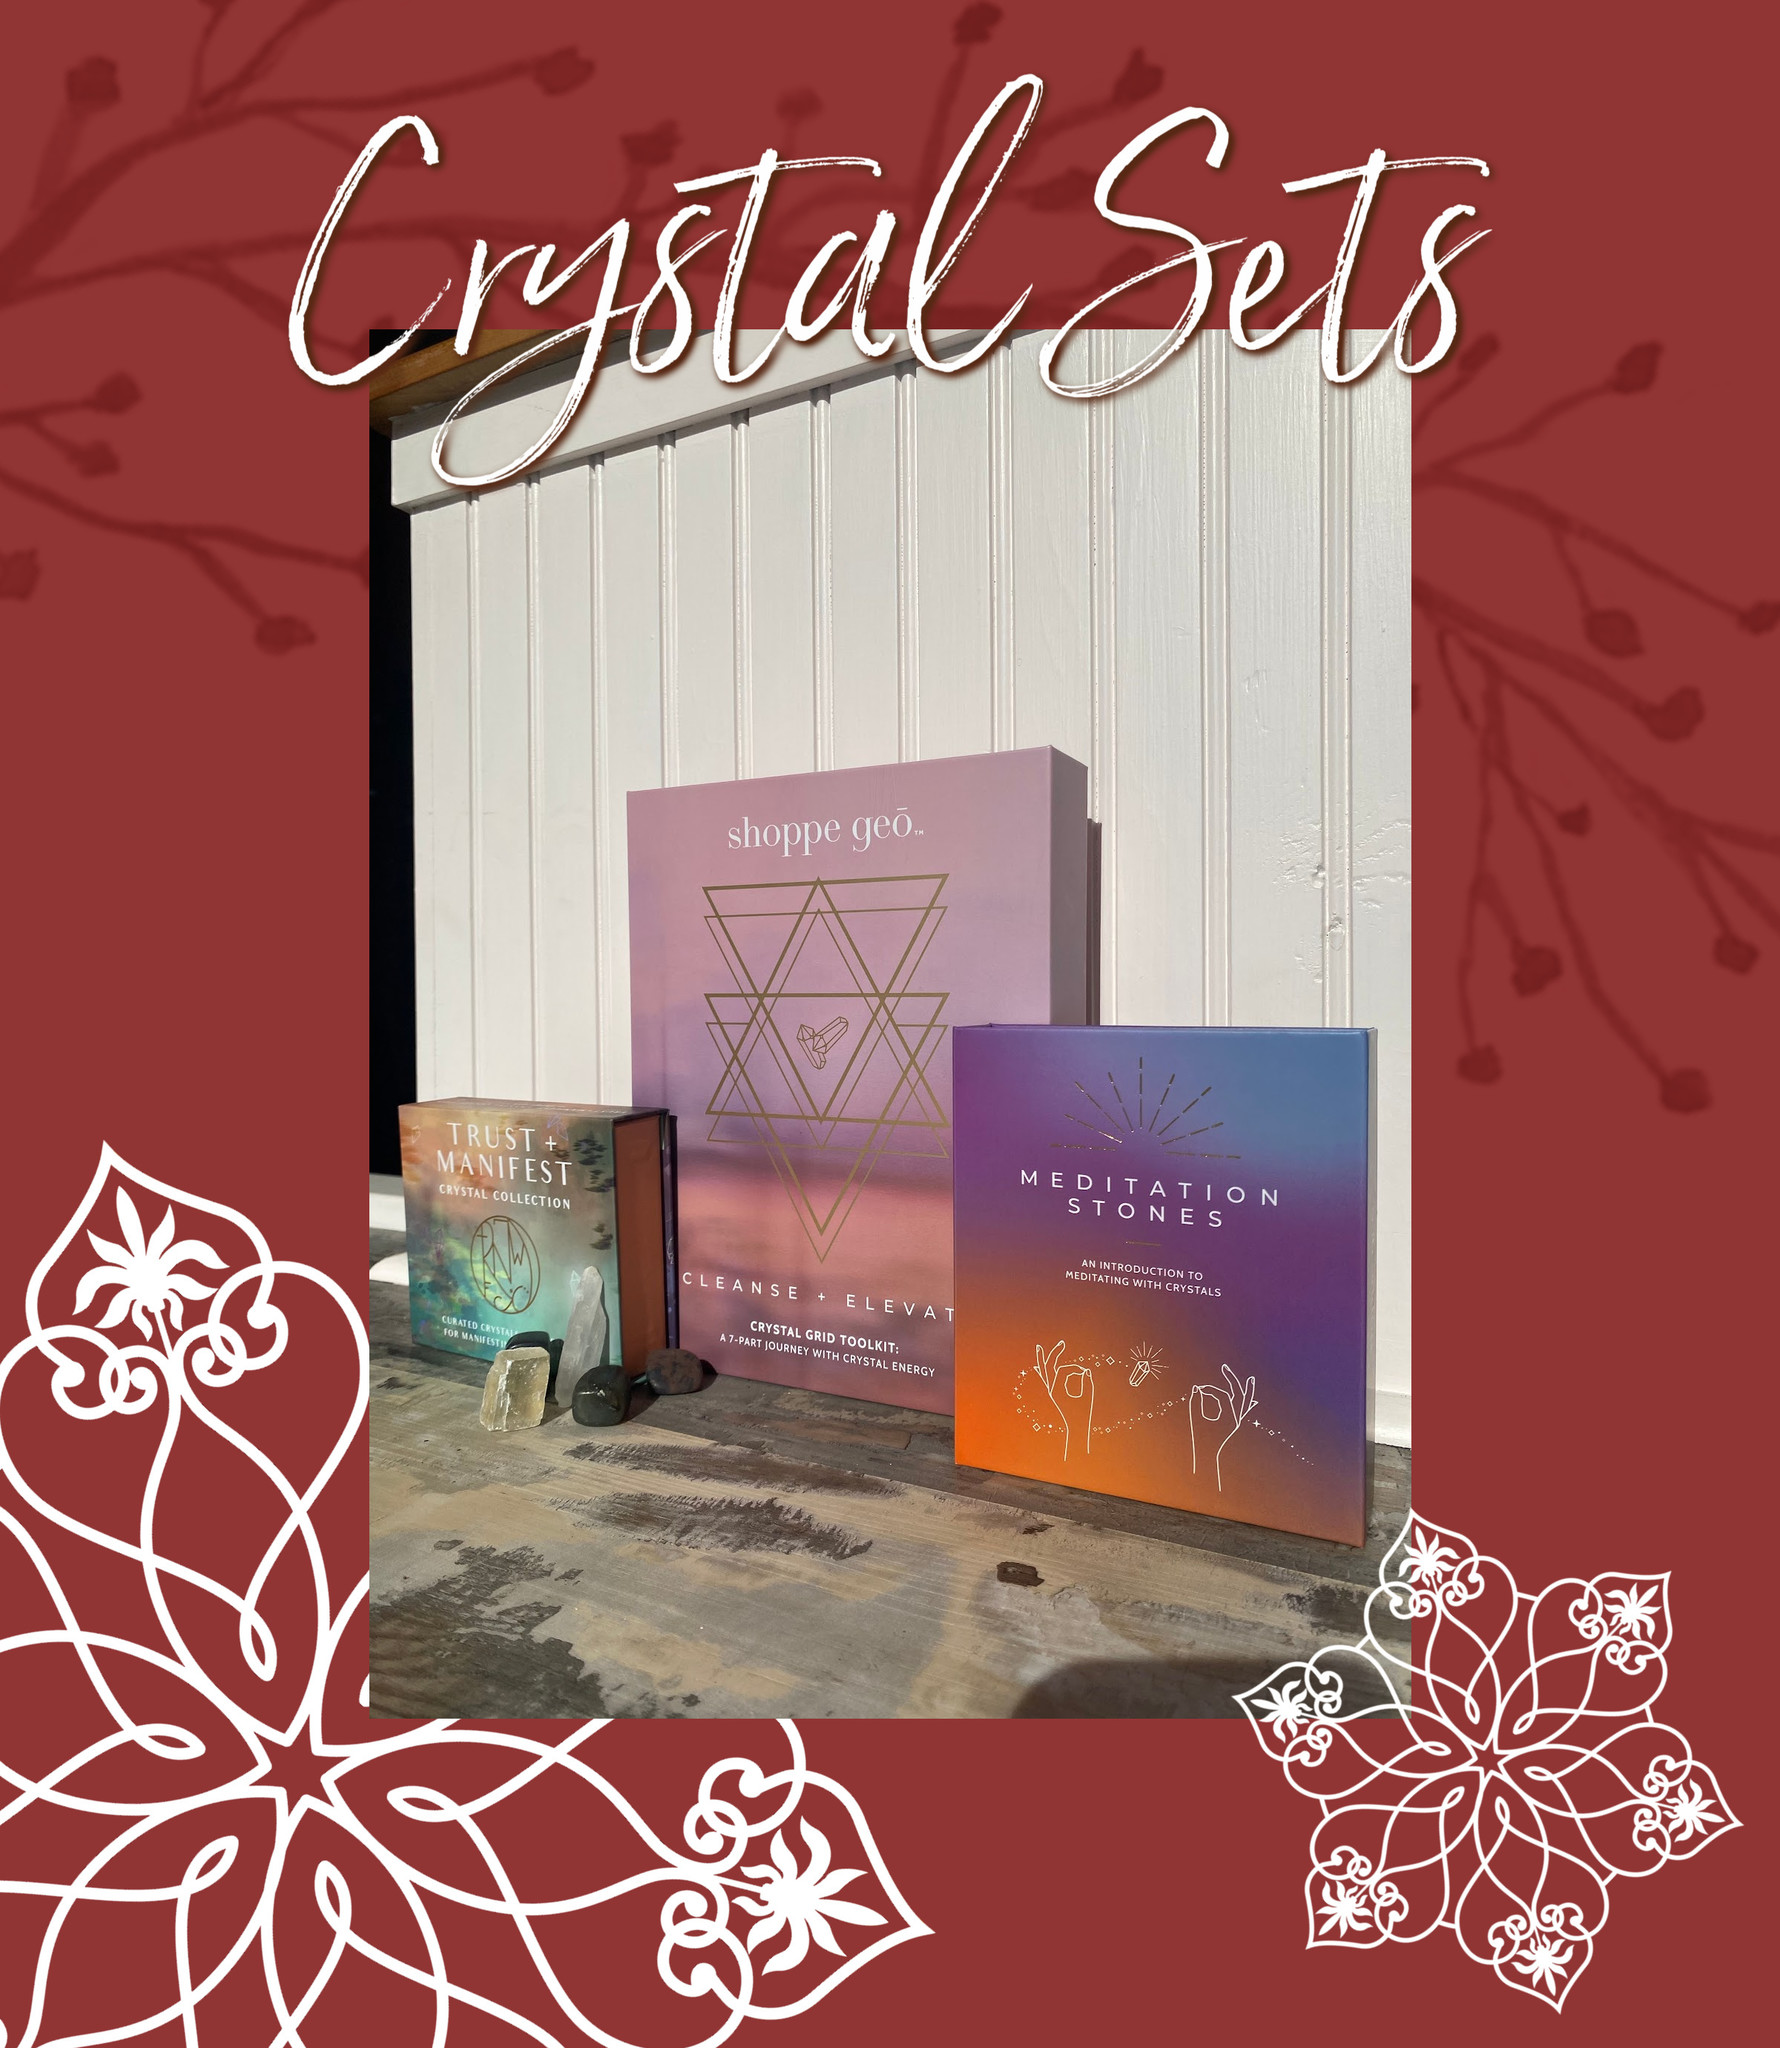 Sets of crystals make for a thoughtful and beautiful gift. Featured here are colorful sets of crystals for trust and manifestation, cleanse and elevating, and a set for mediation. Pictured is labradorite, clear quartz, and yellow quartz.  